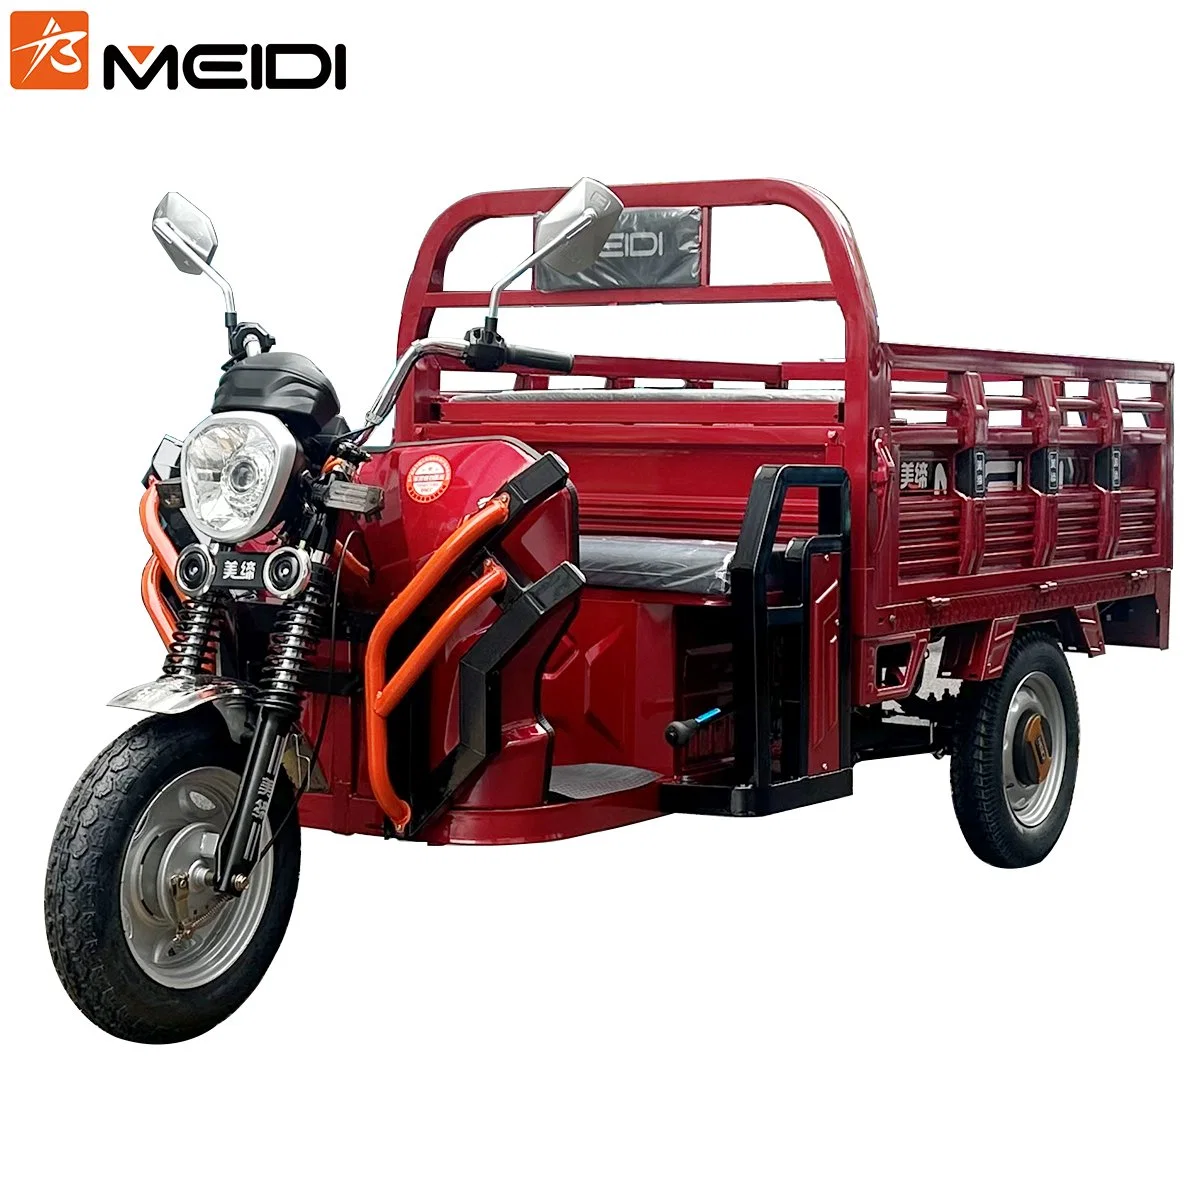 Meidi Powerful Climbing Ability E-Rickshaw Loader Electric Cargo Tricycle